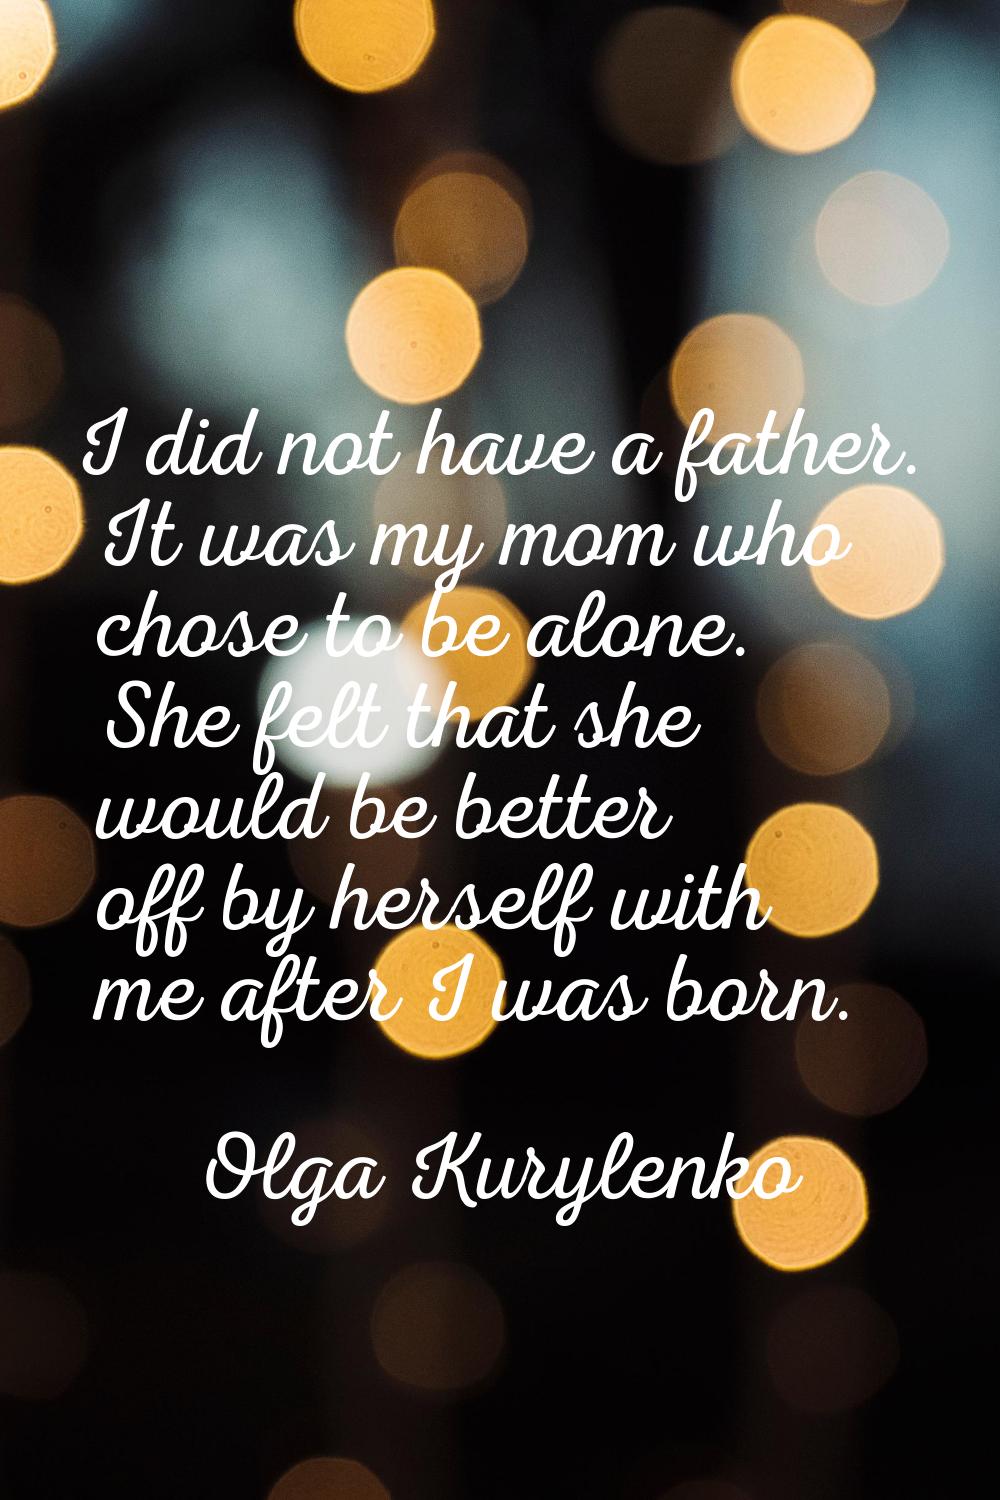 I did not have a father. It was my mom who chose to be alone. She felt that she would be better off